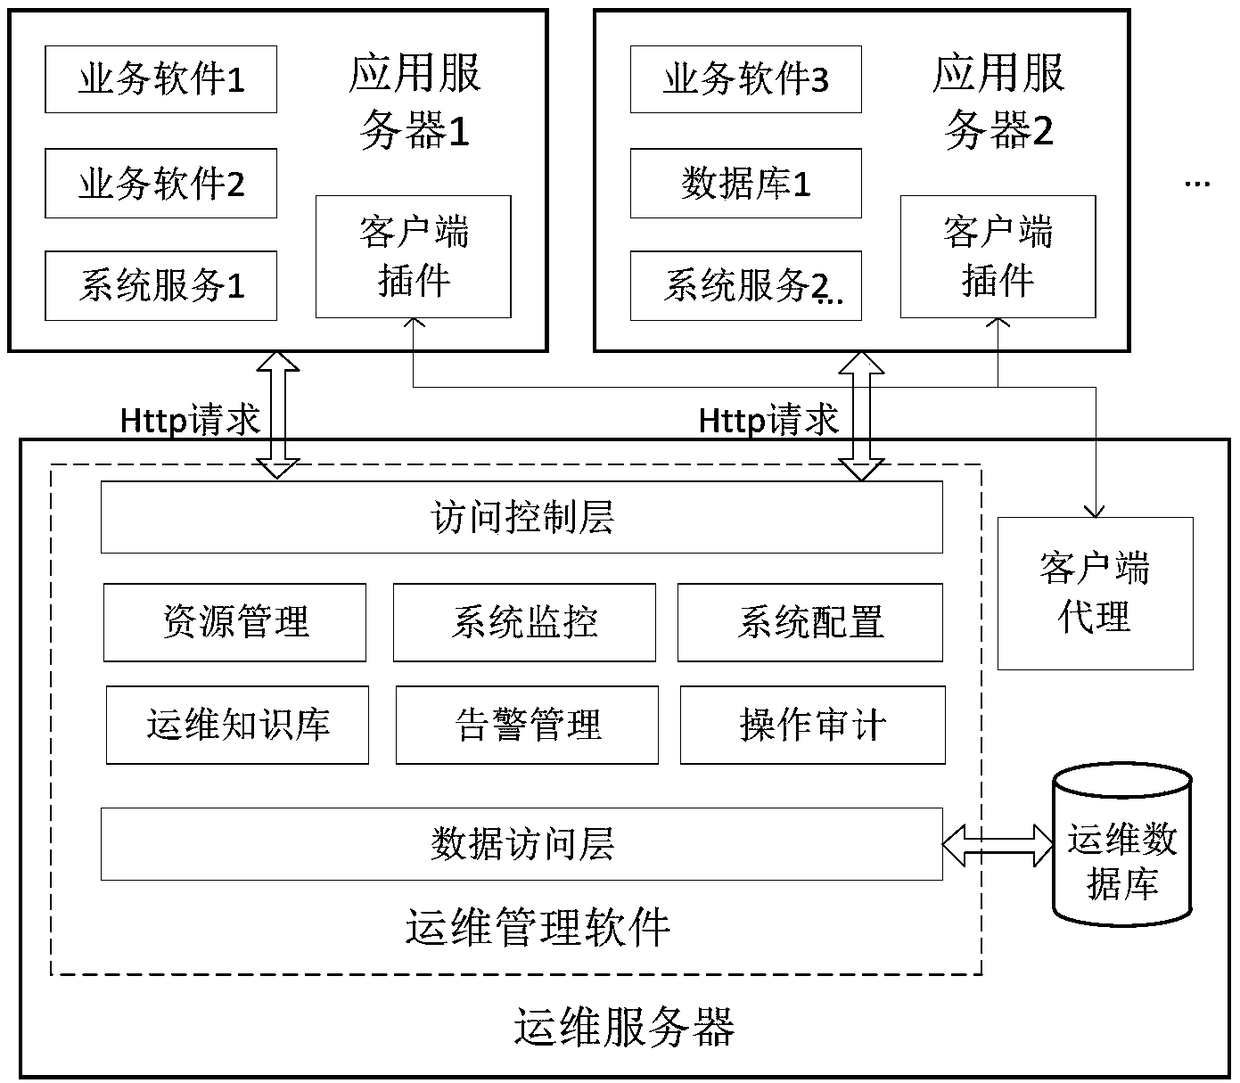 Automatic operation and maintenance system based on management information system